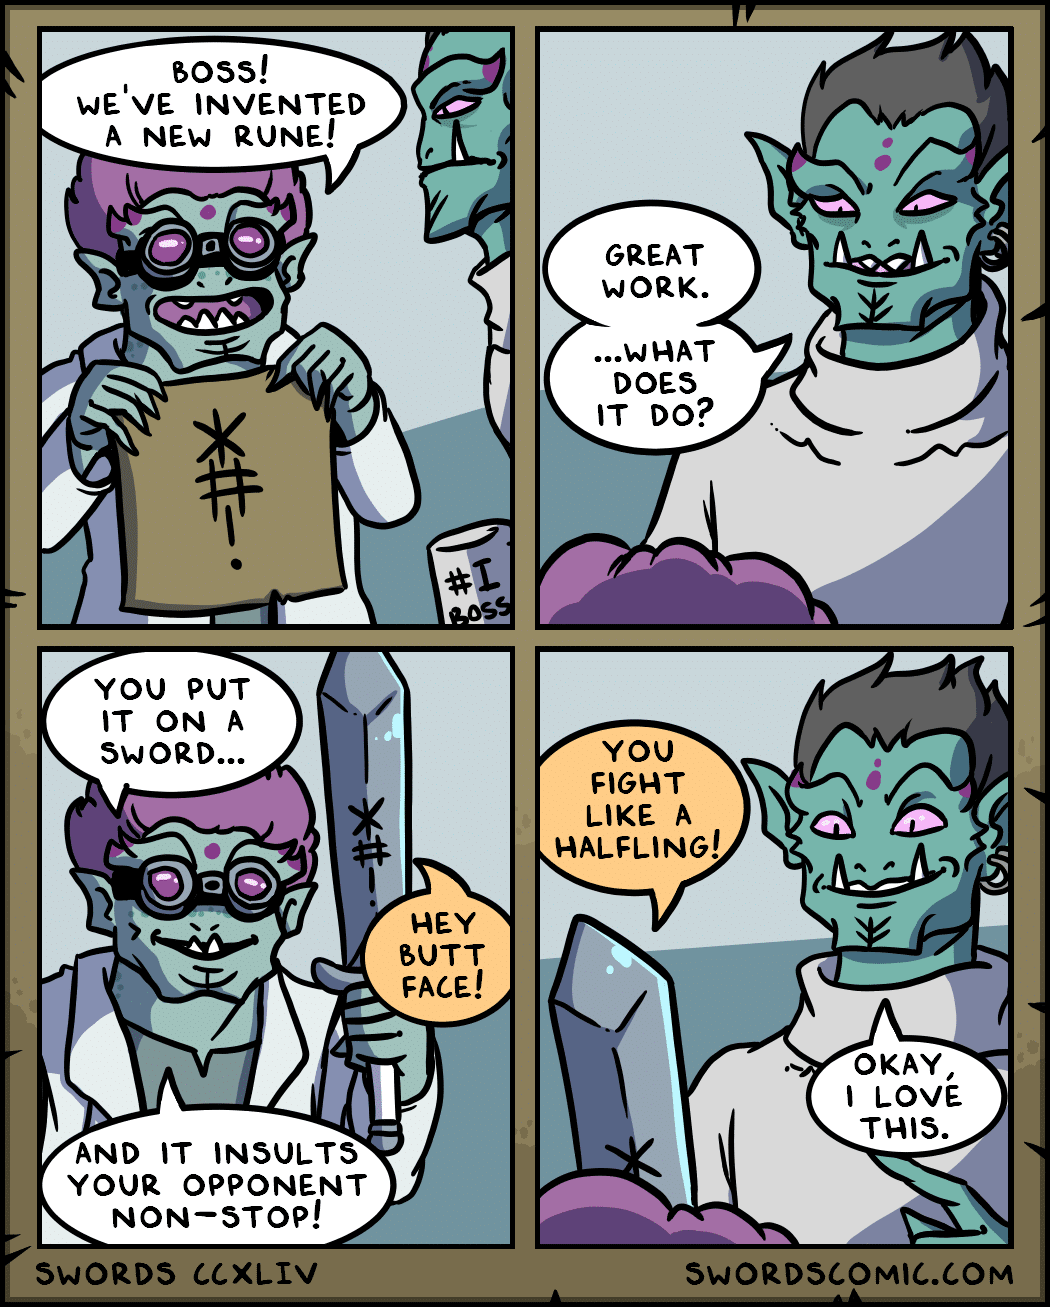 comics comics comics text: boss! WE'VE INVENTED A NEW RUNE! YOU PUT IT ON A SWORD... AND IT INSULTS YOUR OPPONENT NON—STOP! SWORDS CCXLIV GREAT WORK. ...WHAT DOES IT DO? YOU FIGHT LIKE A HALFLING! HEY BUTT FACE! OKAY, t LOVE THIS. SWORDSCOMIC.COM 